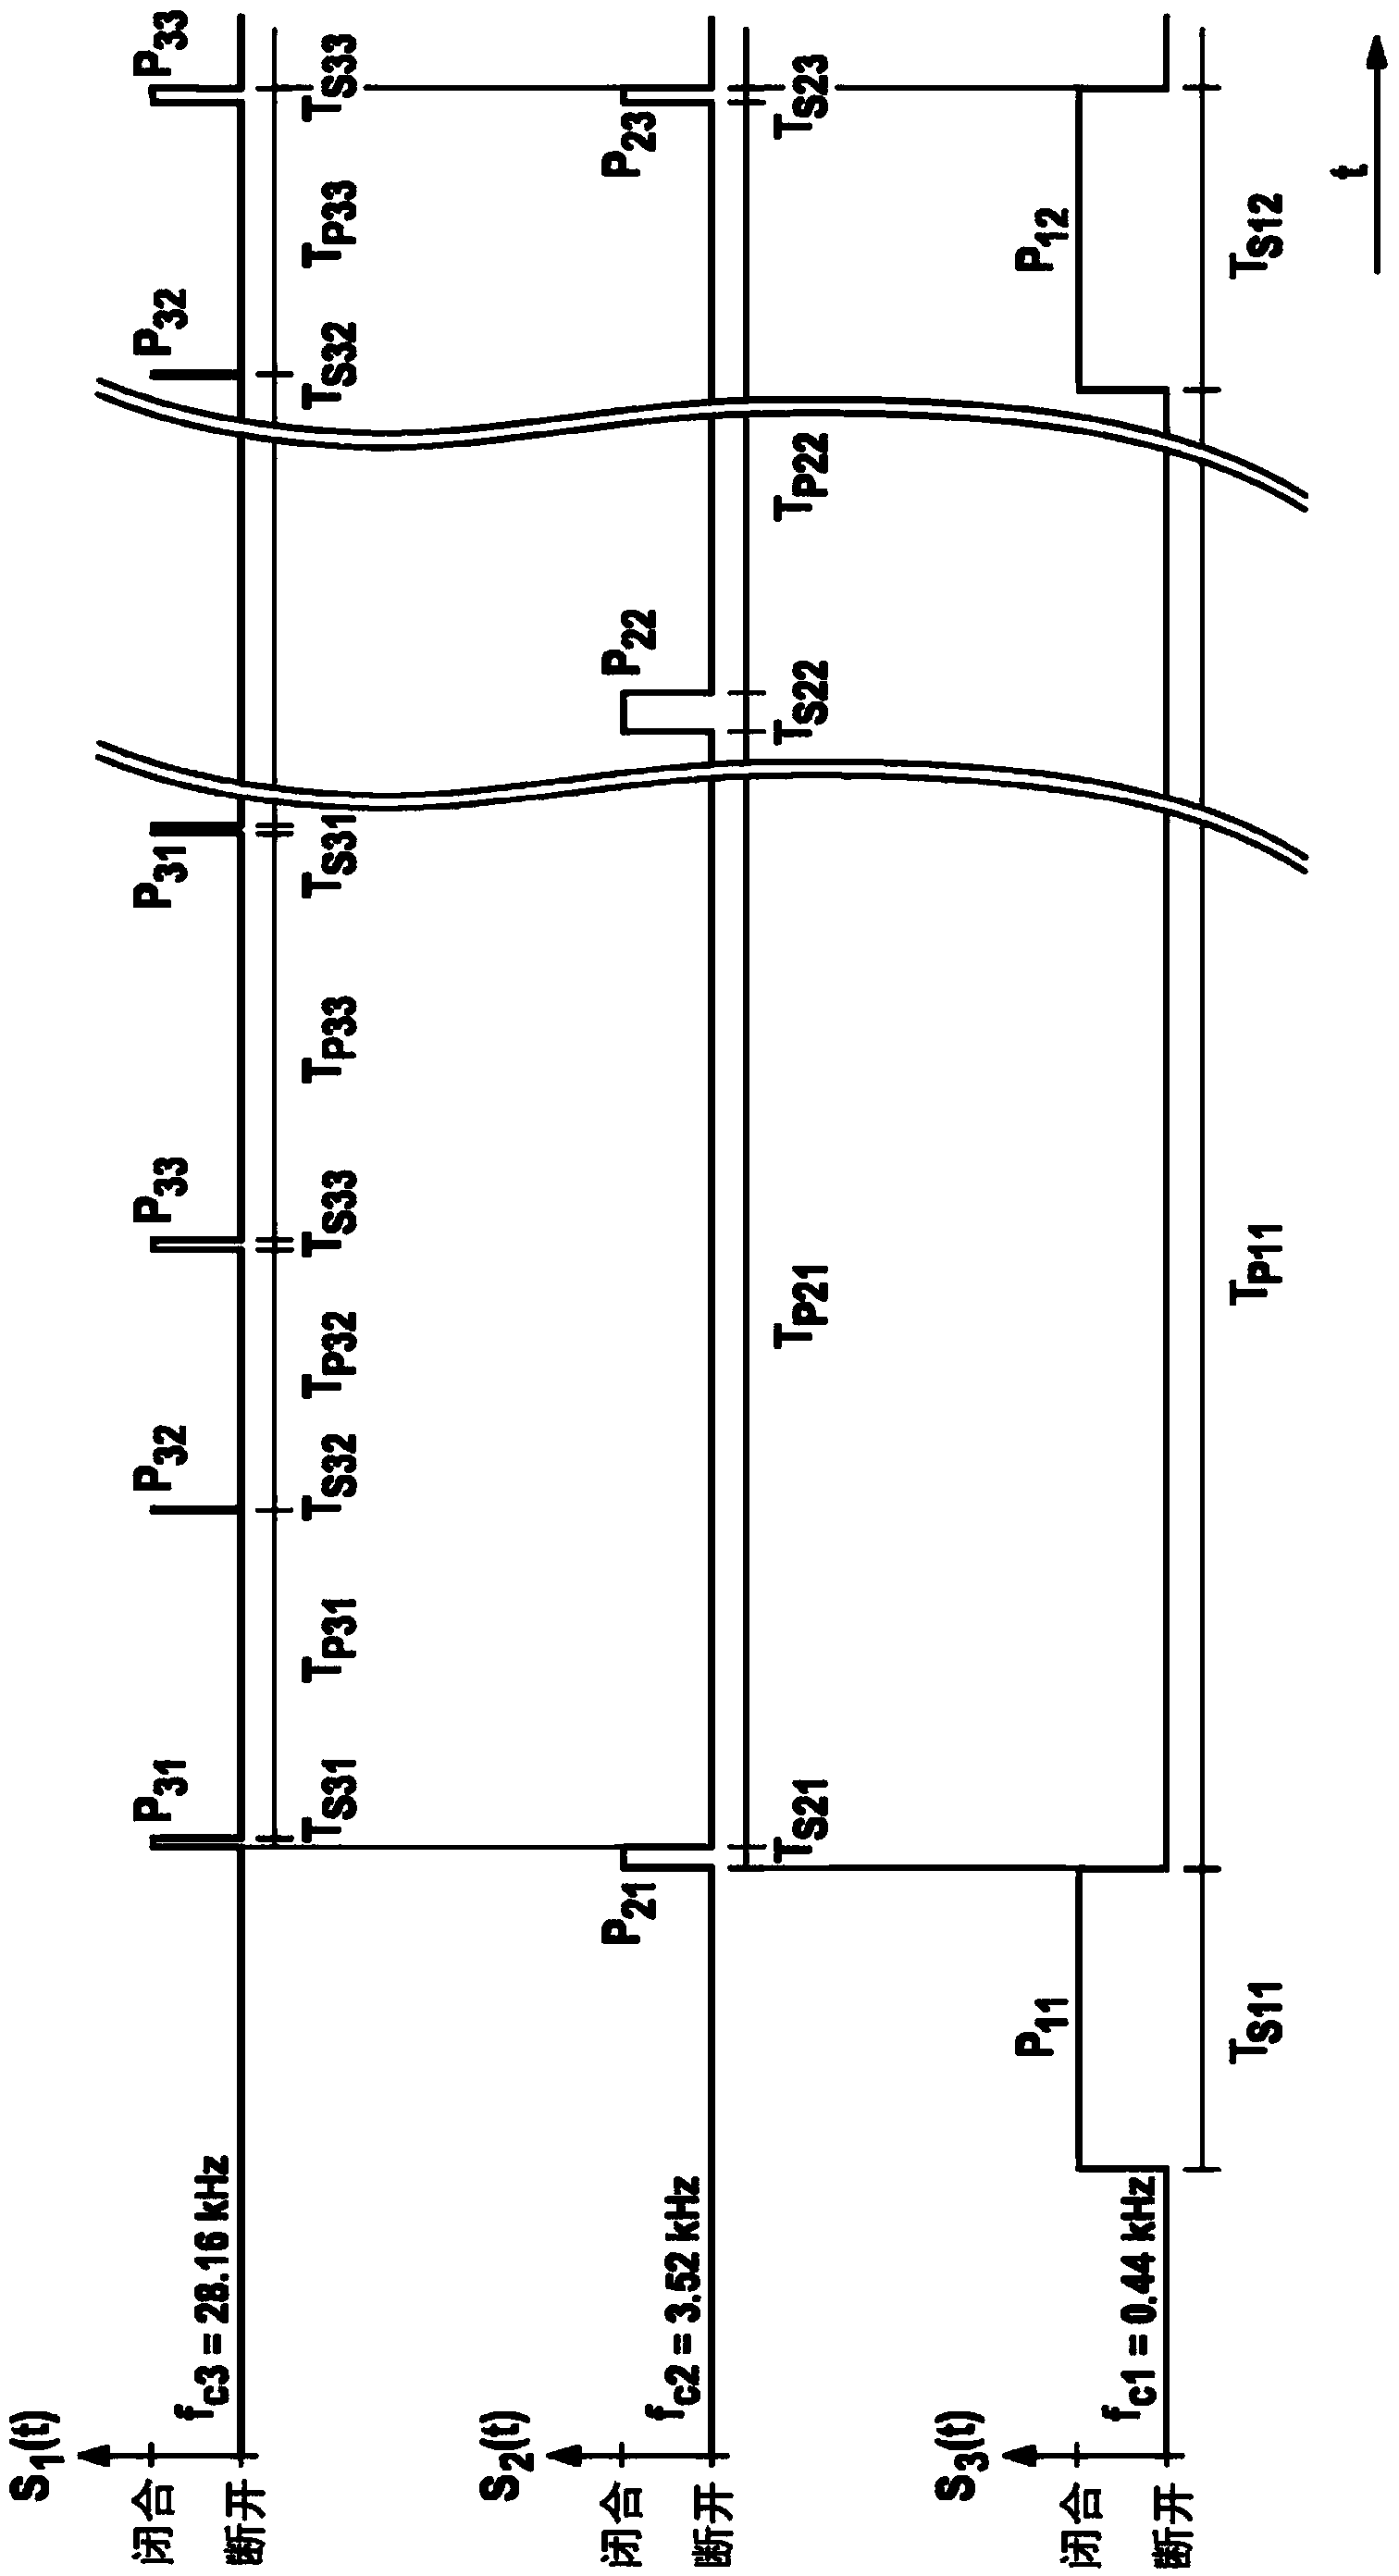 Method and device for sensing surroundings of movement assistant by means of sound signals which are emitted in form of pulses